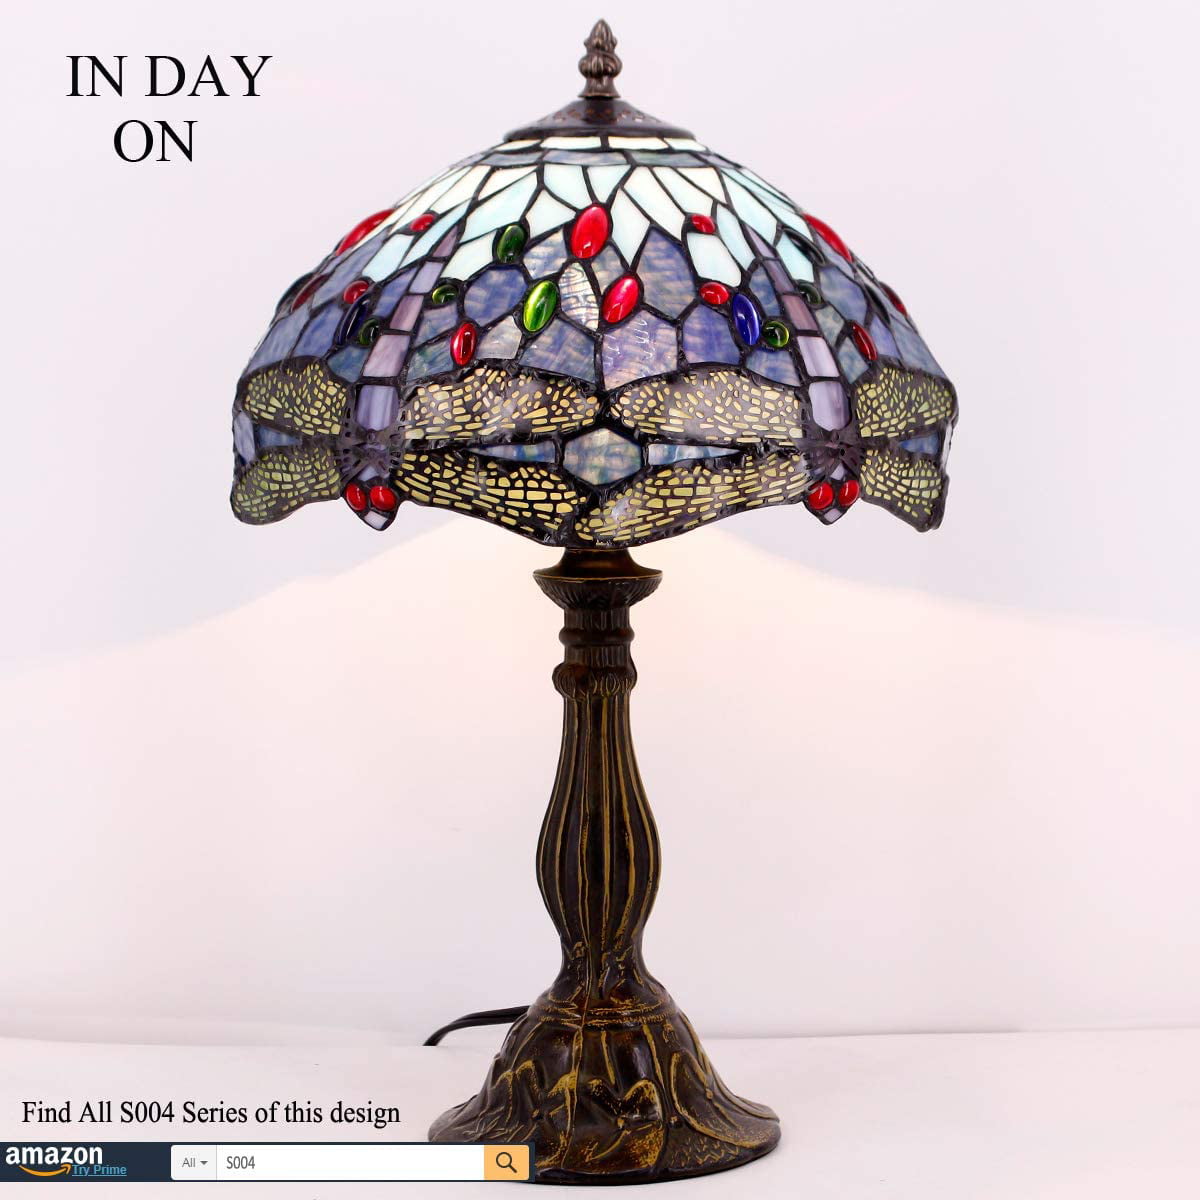 SHADY  Table Lamp Blue Stained Glass Dragonfly Style Bedside Desk Reading Light 12X12X18 Inches Decor Bedroom Living Room Home Office S004 Series